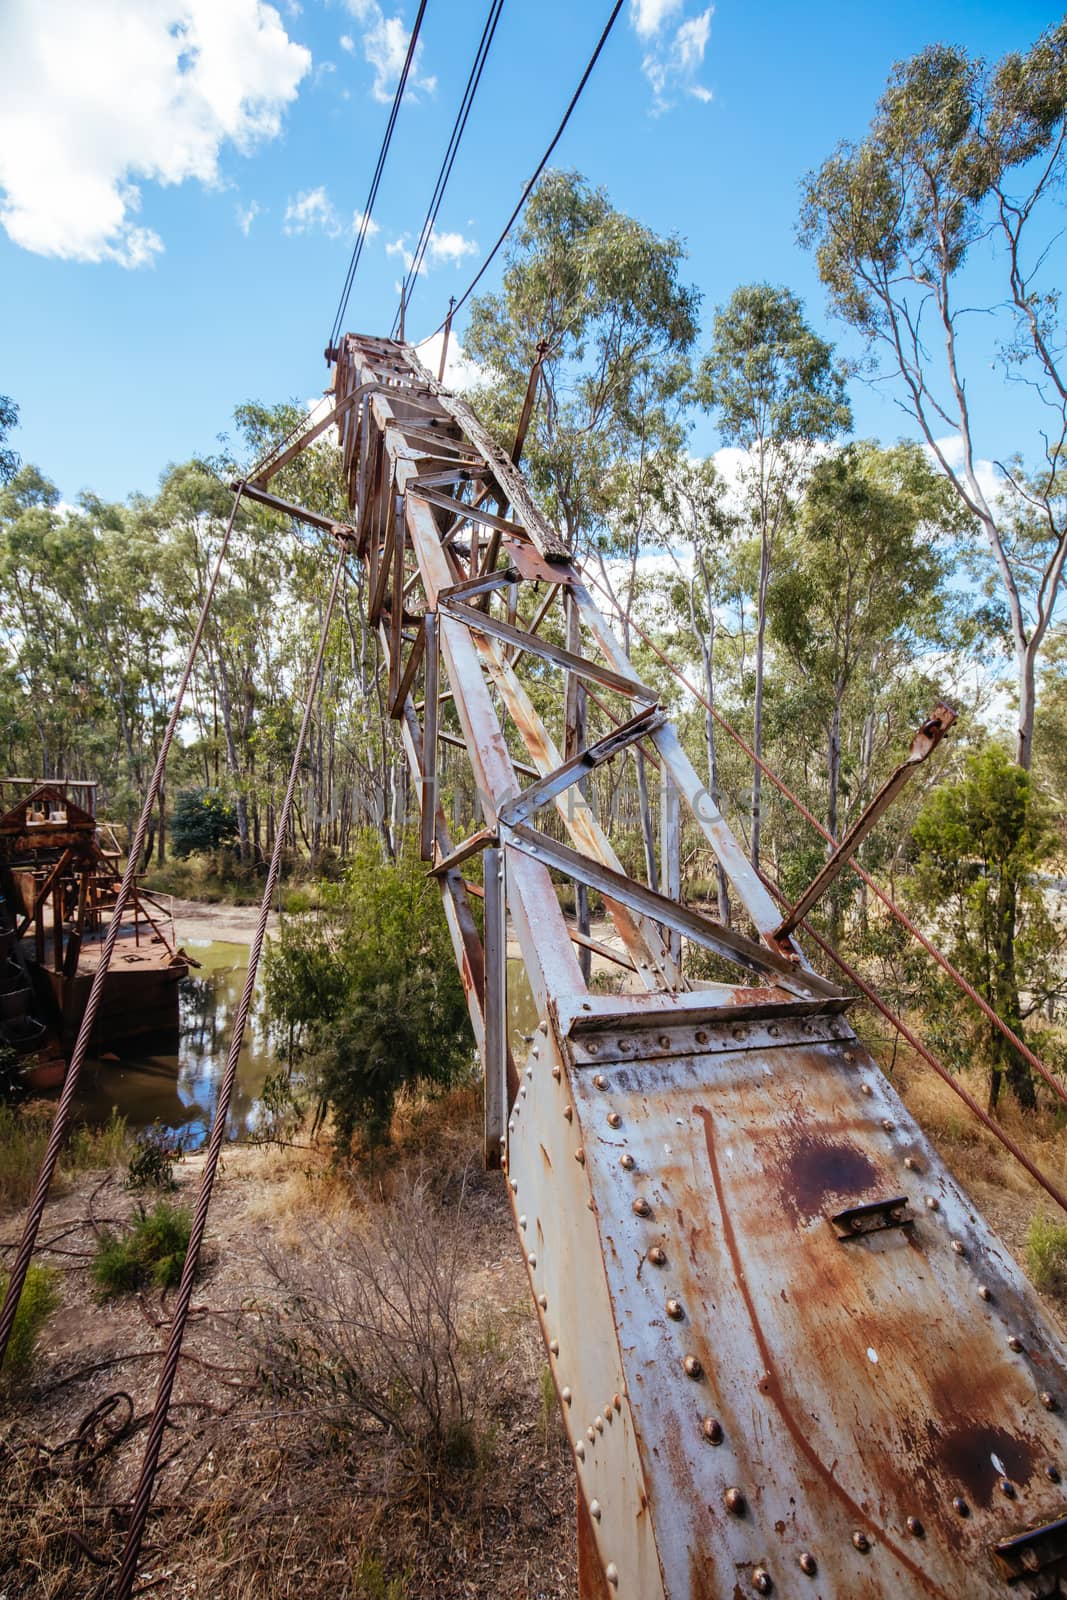 An old Dredge and Dragline which is an abandoned piece of gold mining equipment near Maldon in Victoria, Australia